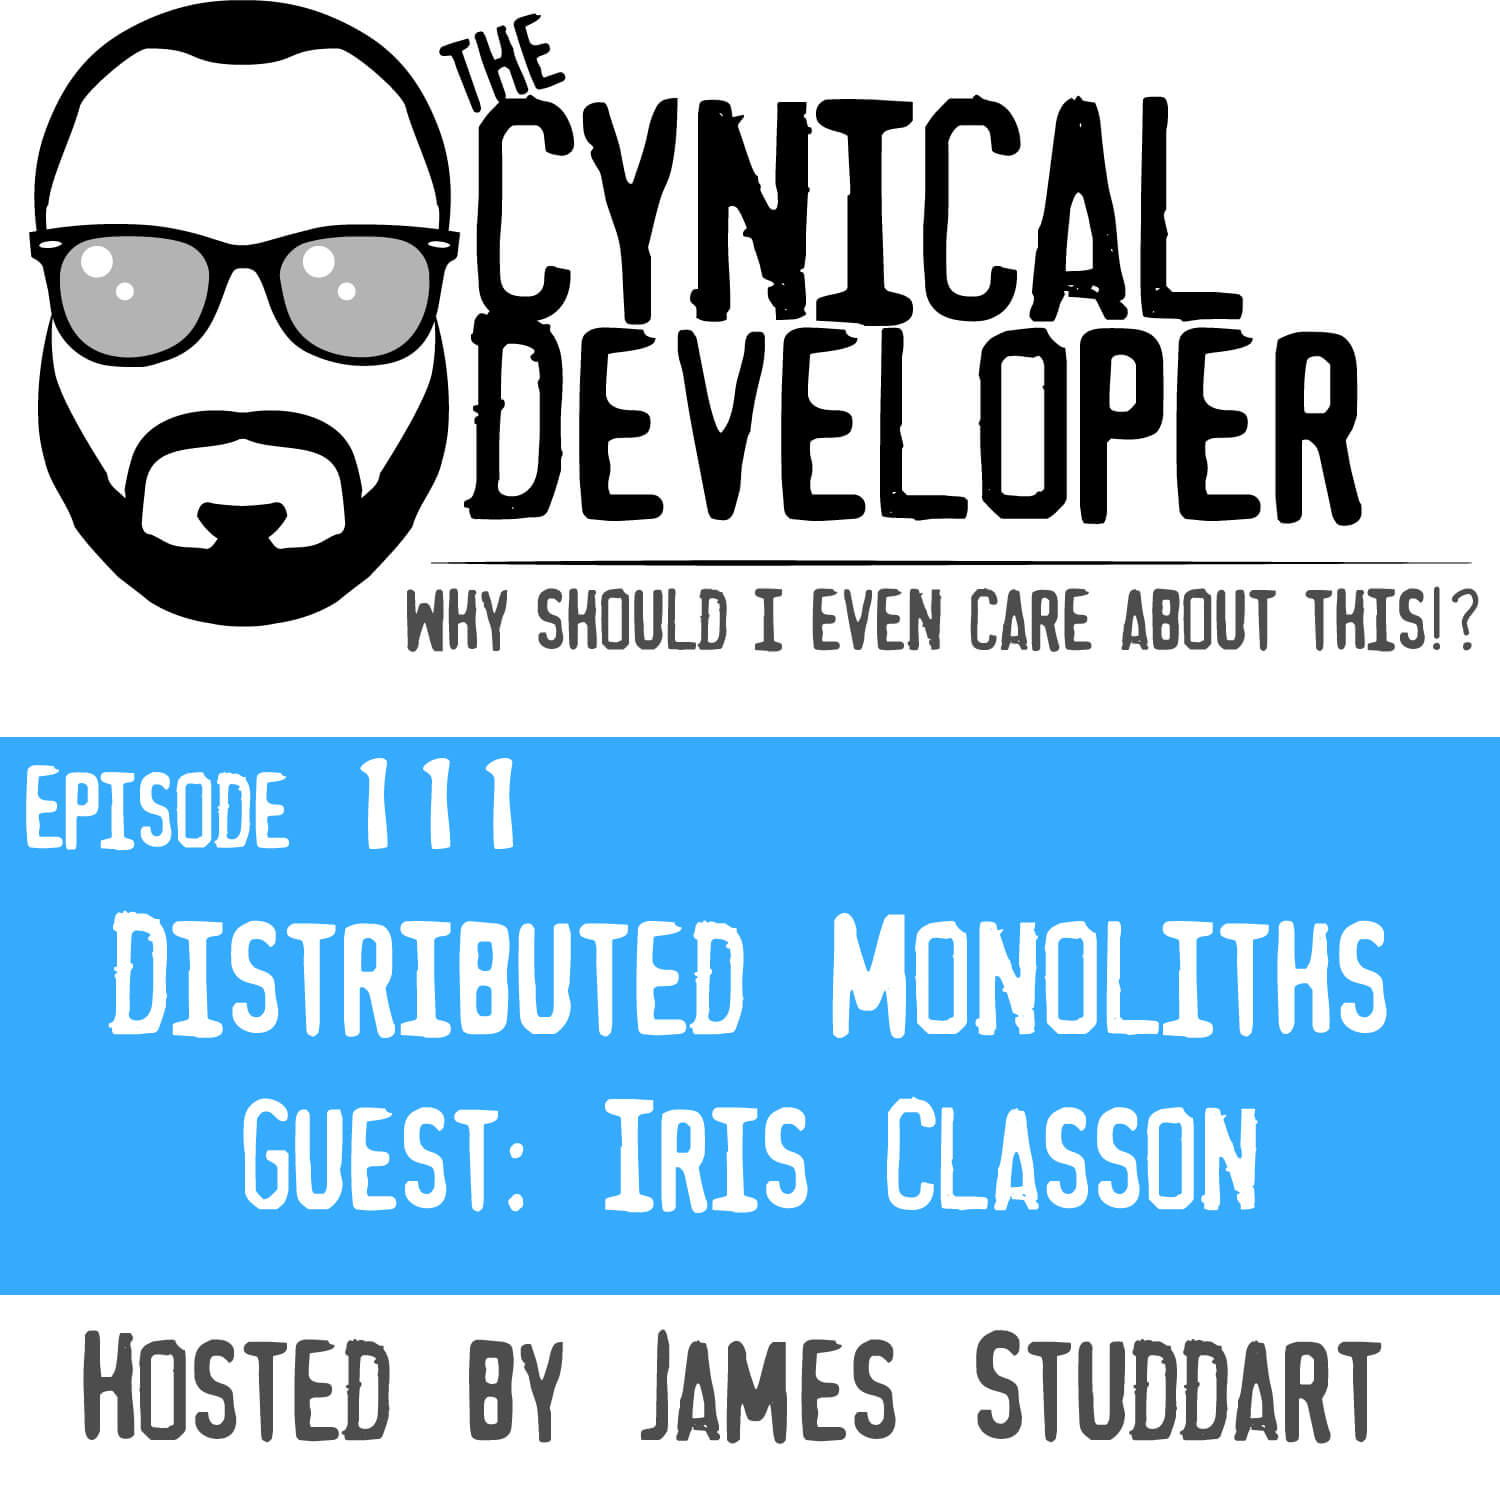 Episode 111 - Distributed Monoliths